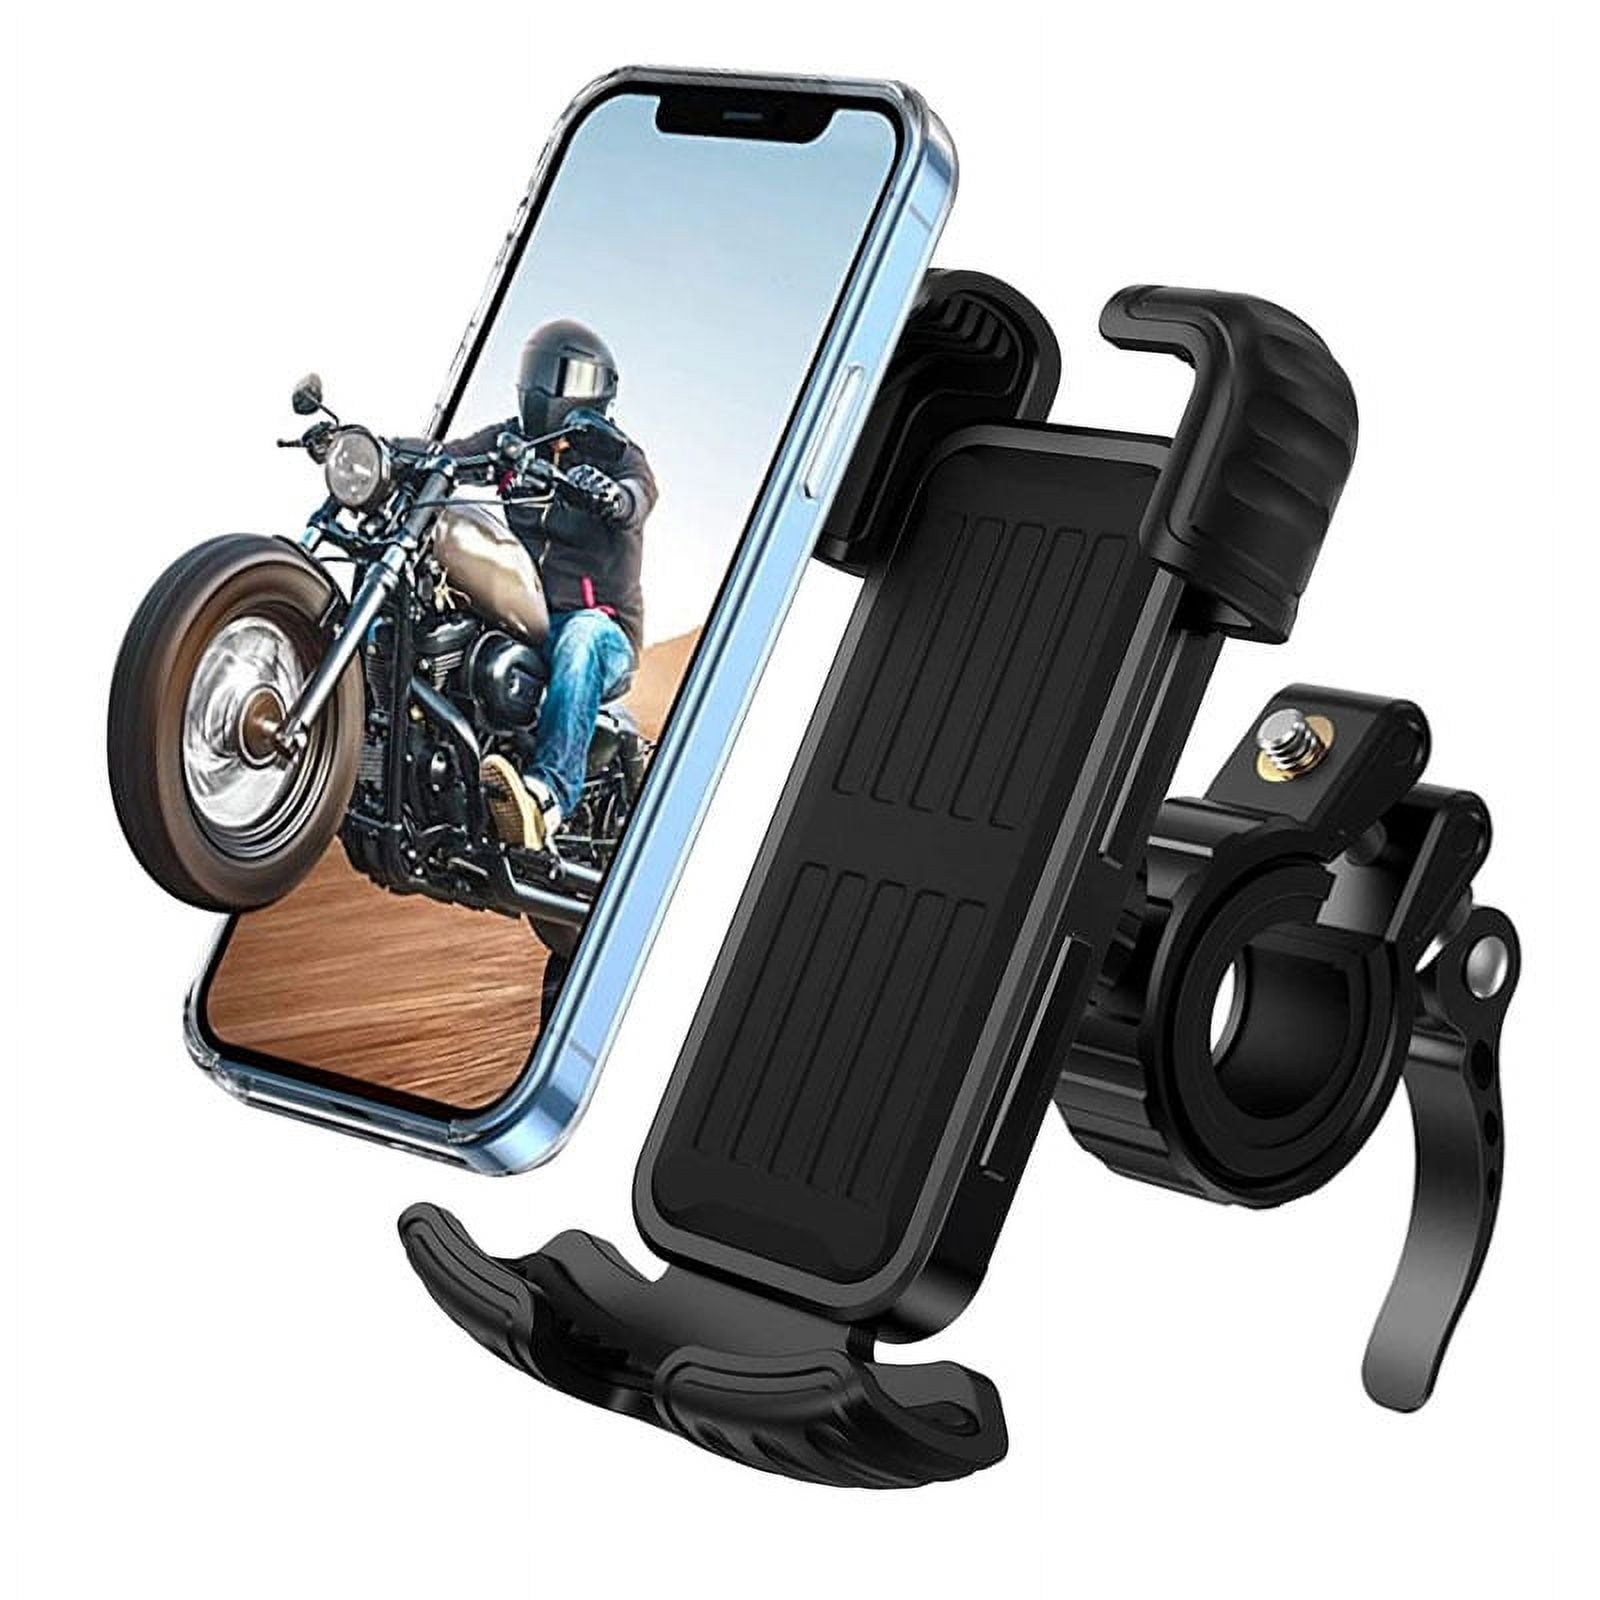 Bike Phone Holder, Motorcycle Phone Mount by LIFETWO - Knob Adjustment Handlebar of Motorcycle Phone Mount for Electric, Mountain, Scooter, and Dirt